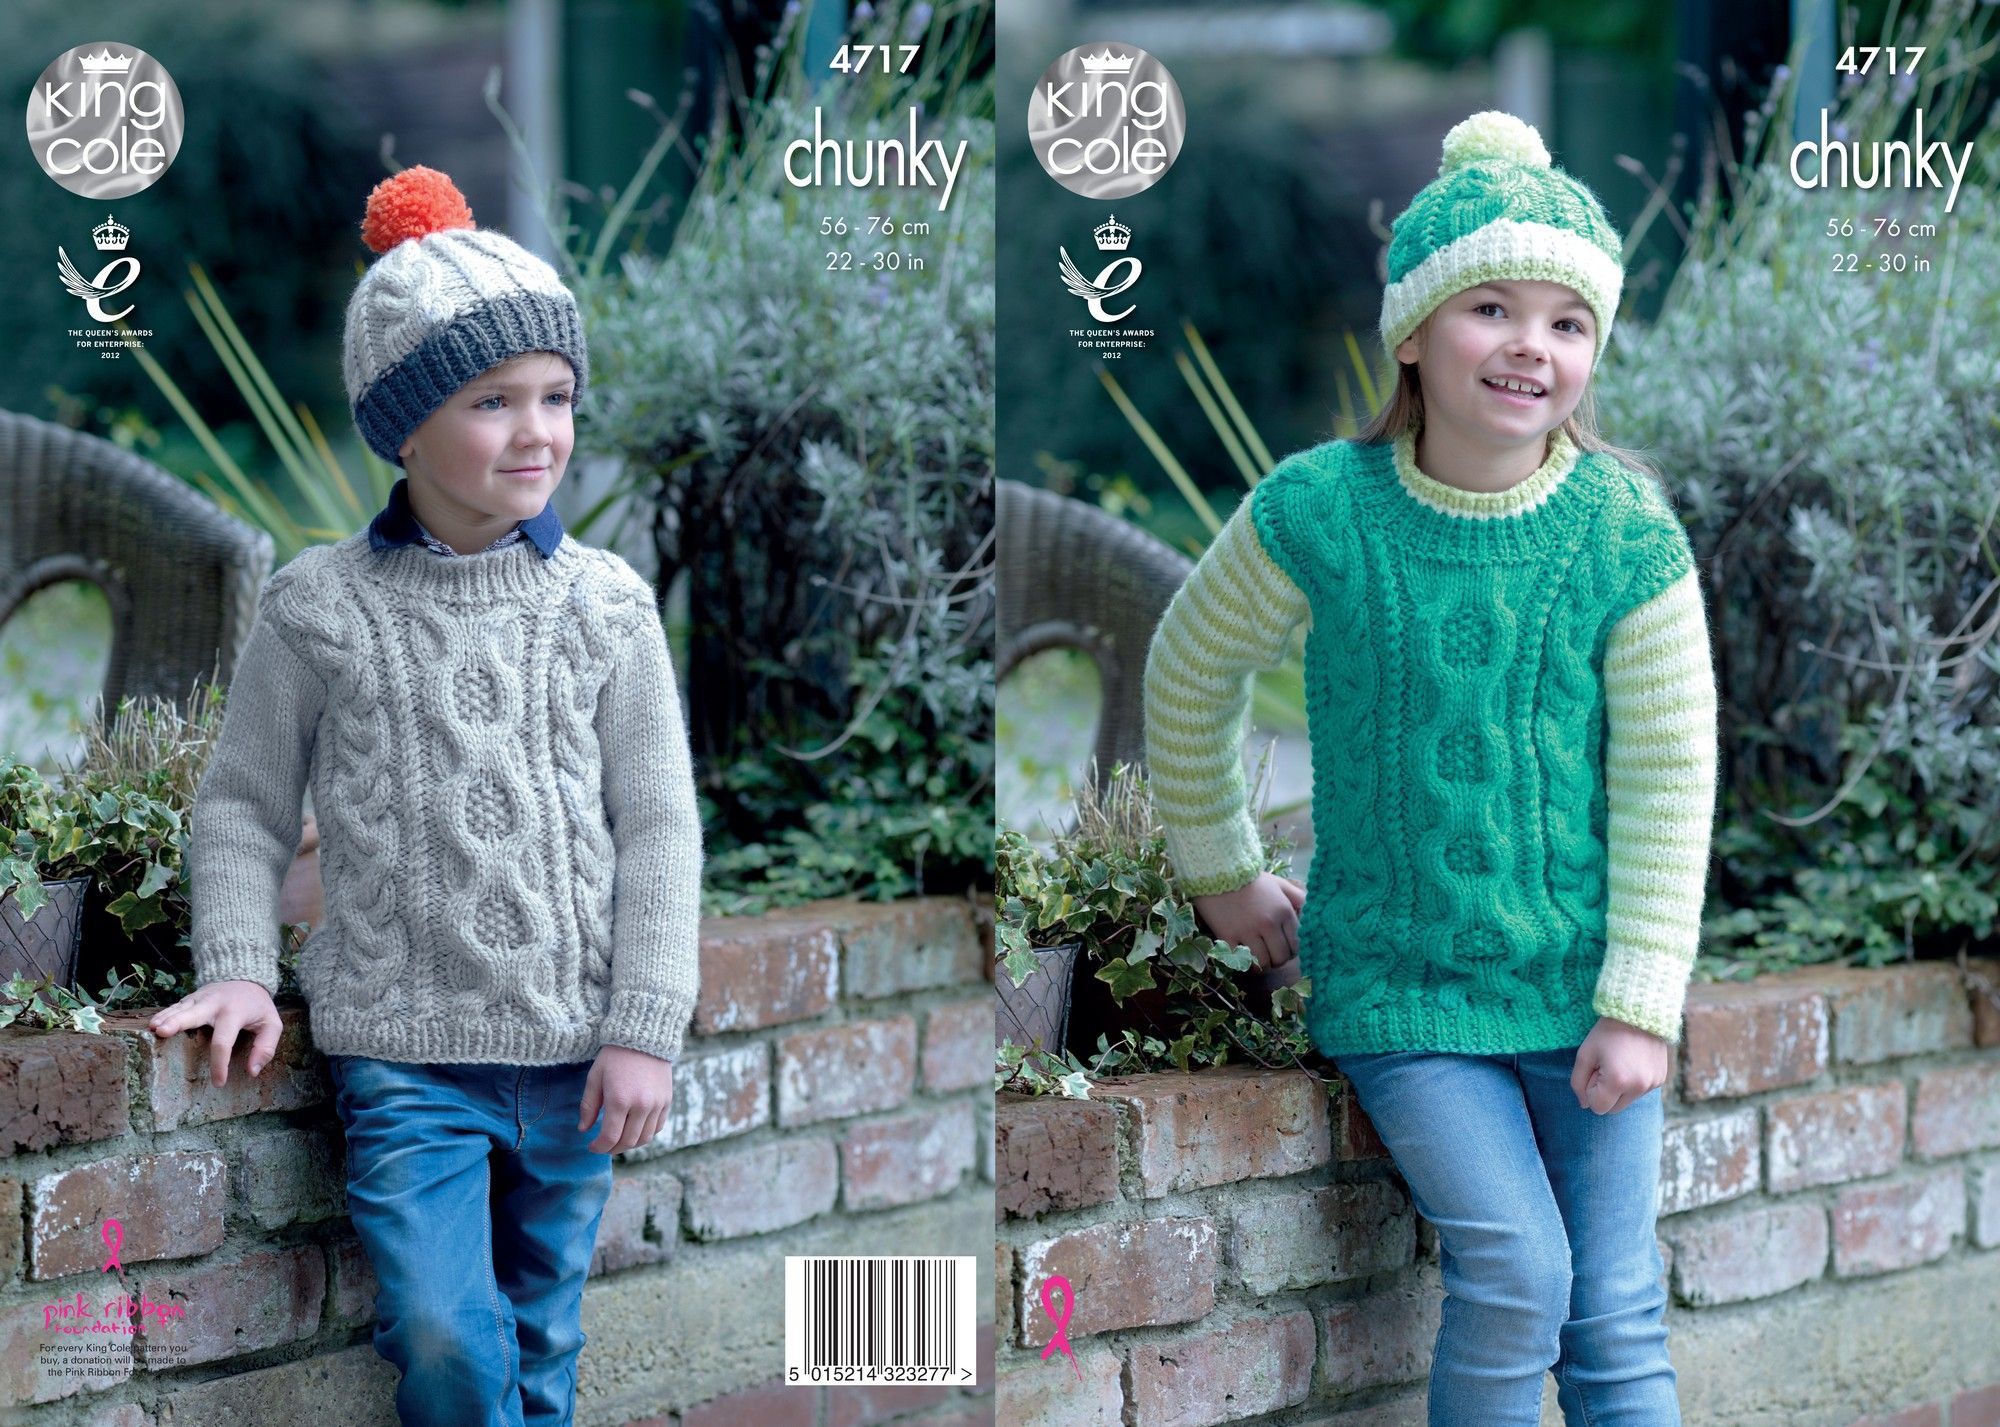 King Cole Pattern 4717 Children's Sweaters and Hats in Chunky